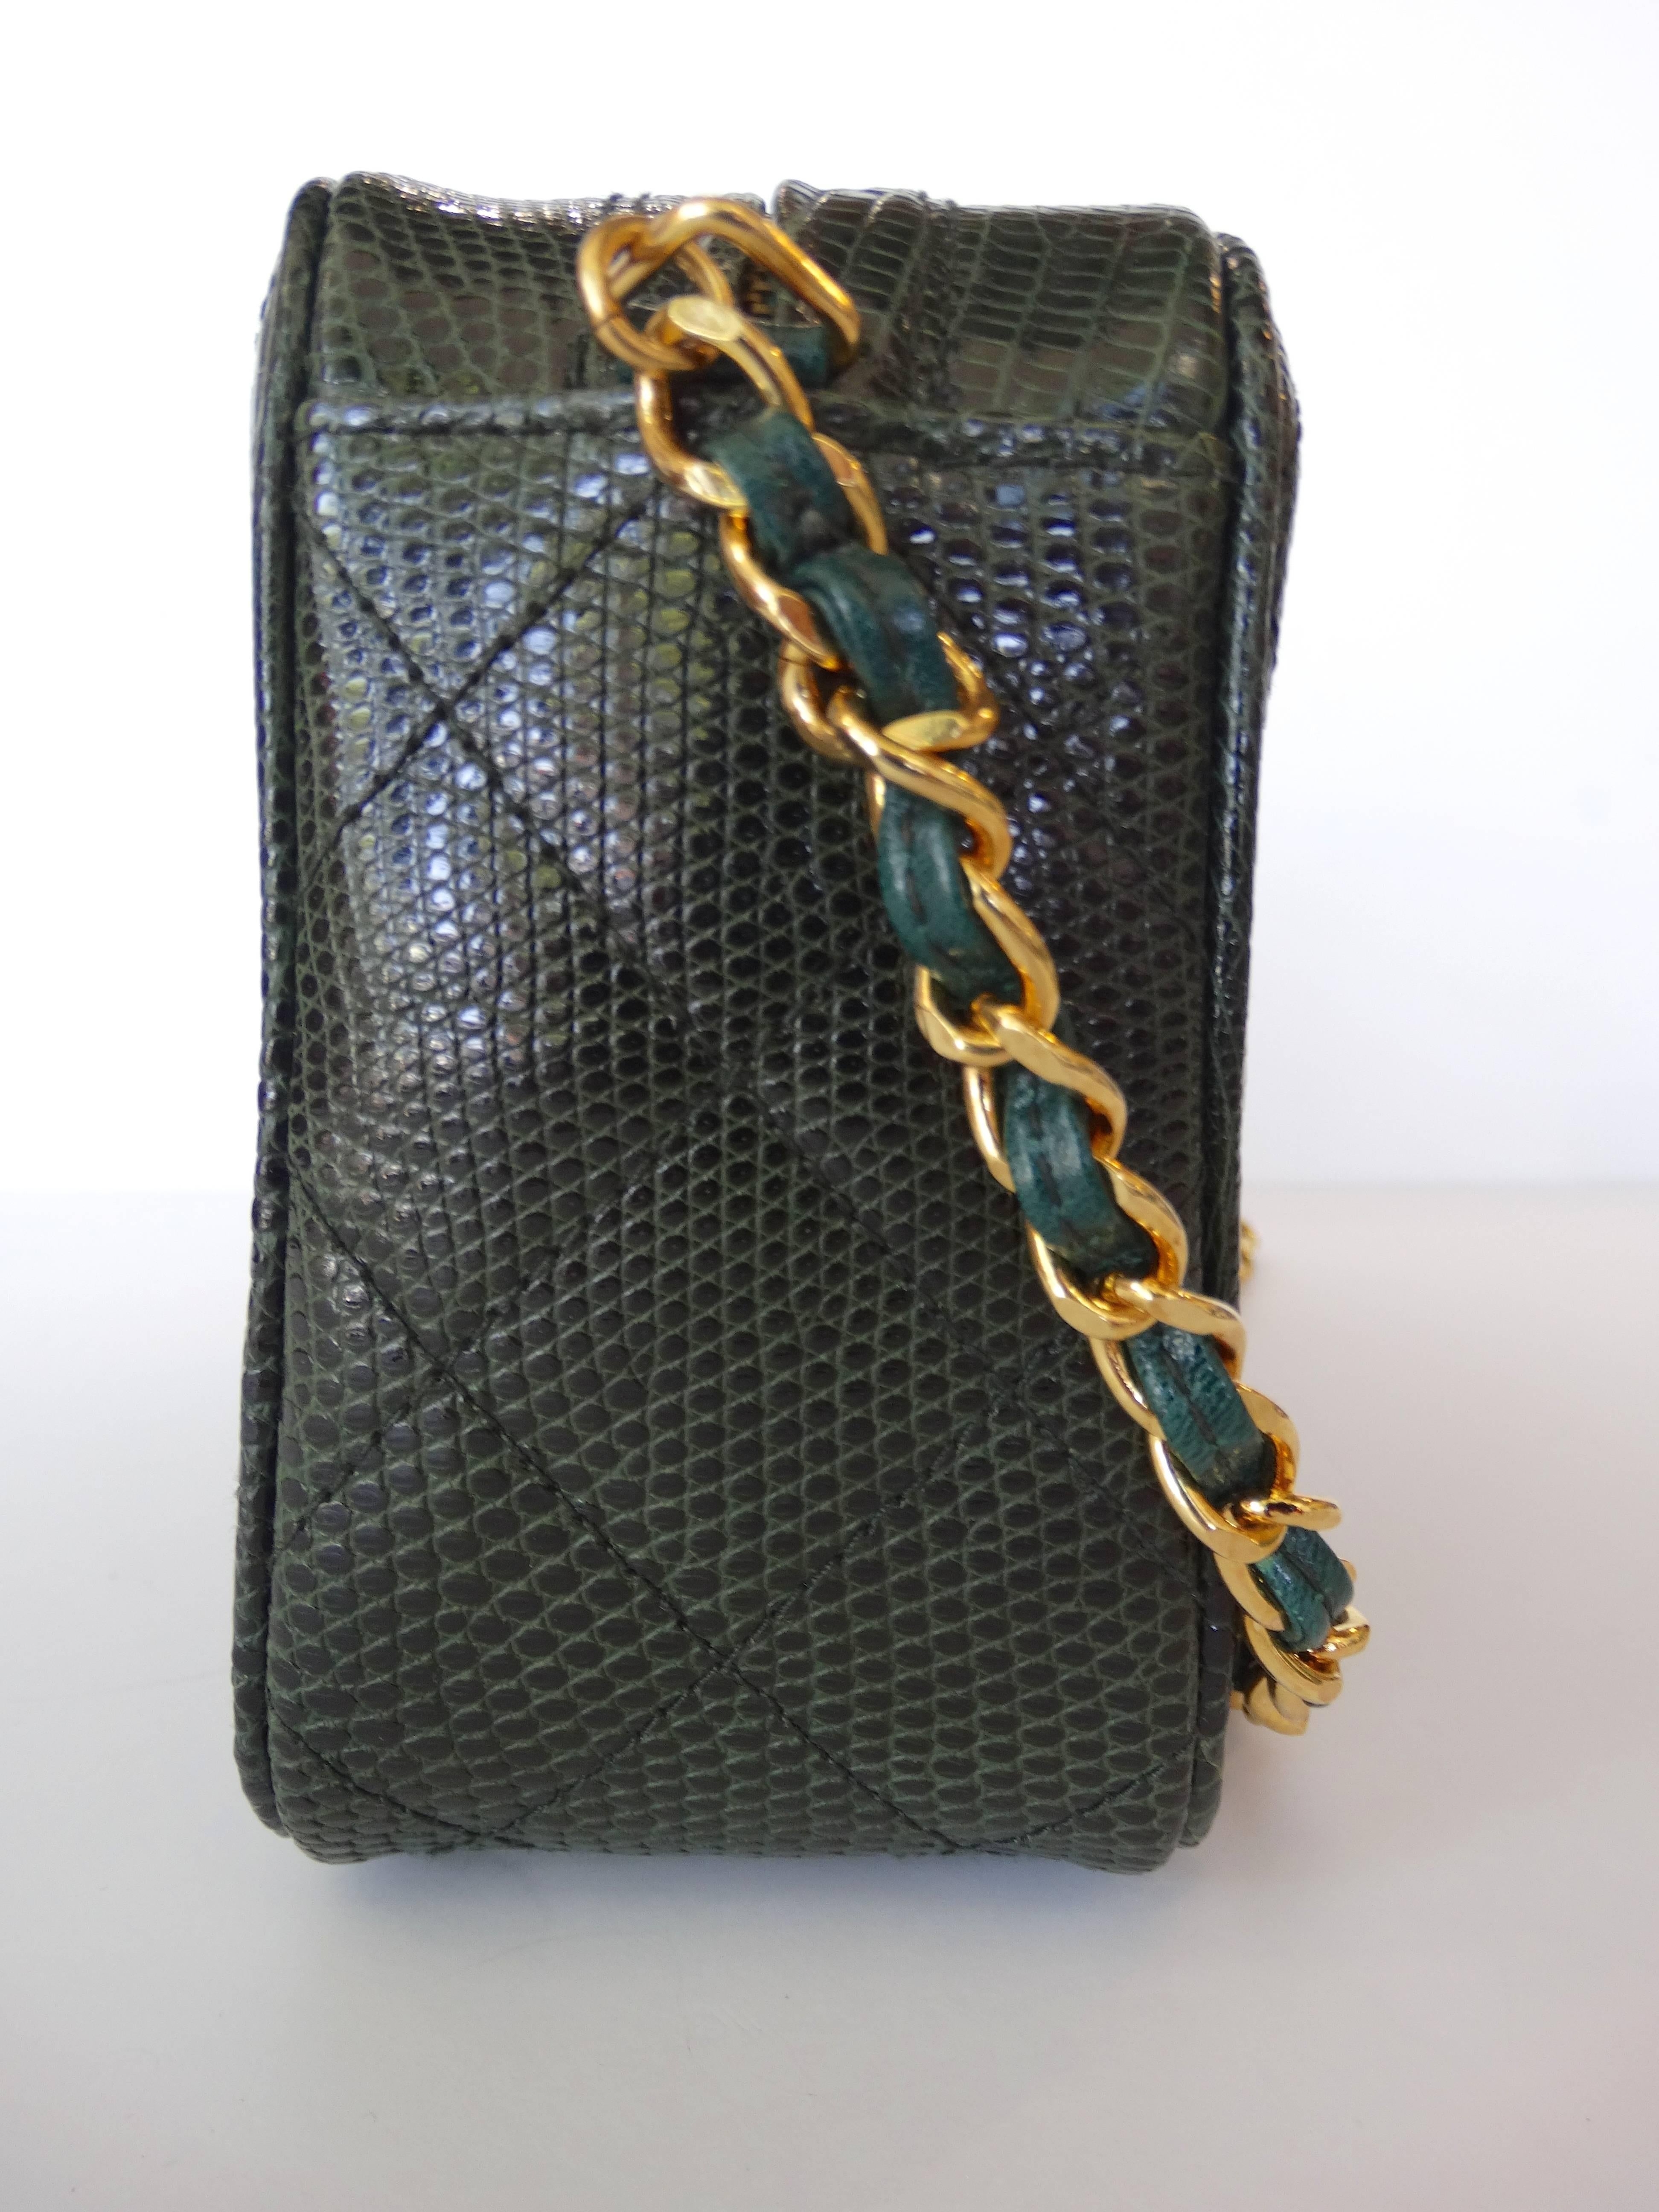 Early 90's green quilted lizard Chanel vintage camera bag with gold-tone hardware, single chain-link shoulder strap,  black leather lining, single zip pocket at interior wall and zip closure at top with tassel charm pull. Serial number reads